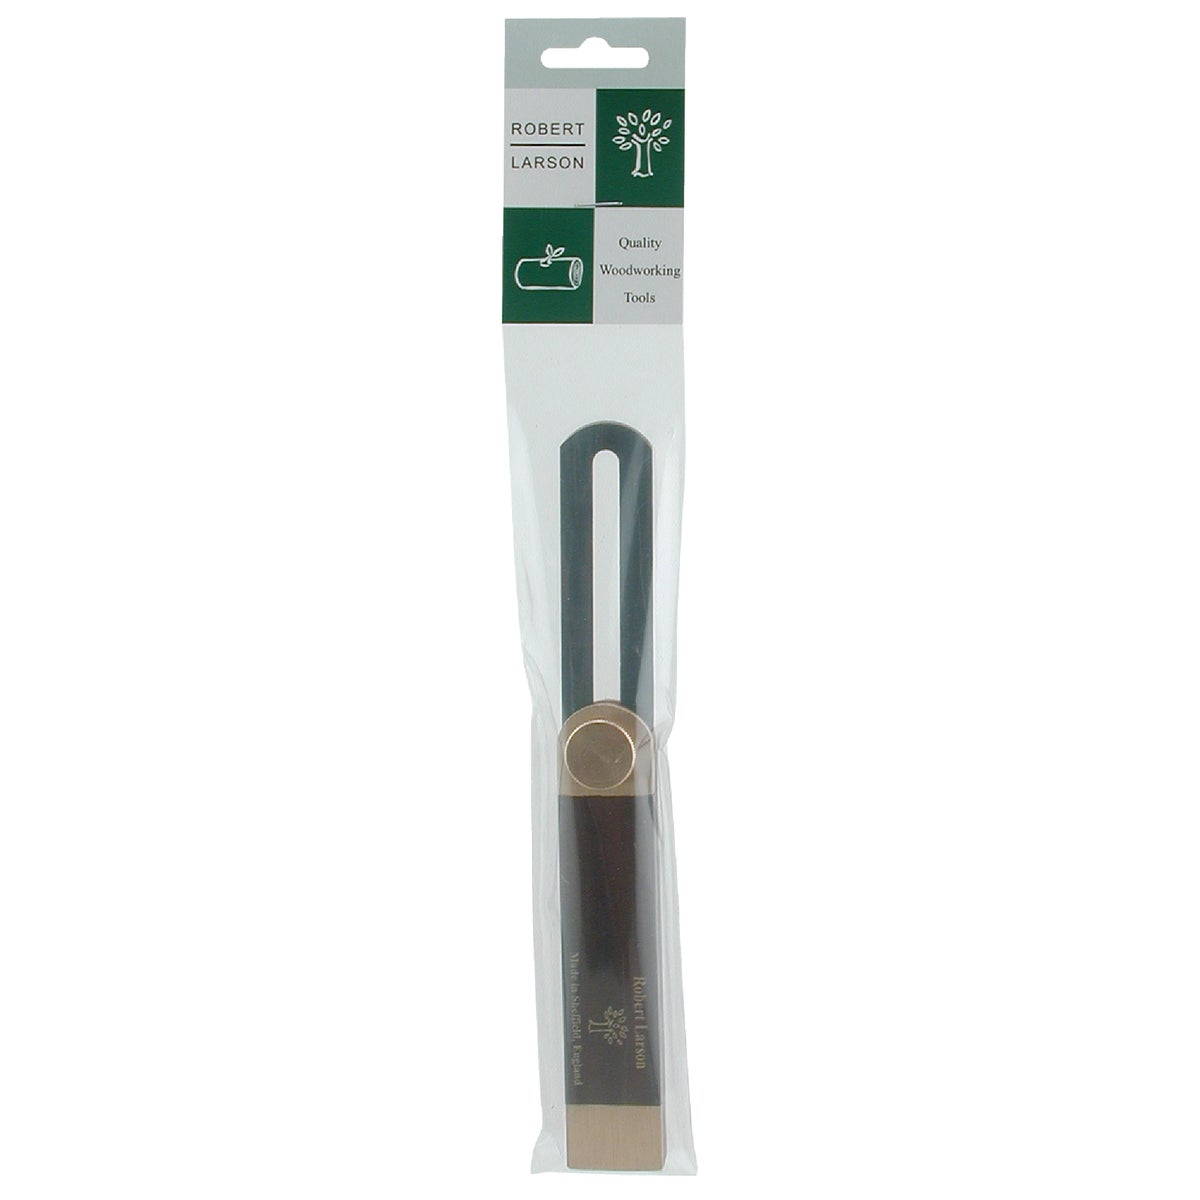 Item 315723, Adjustable to any angle, use this fine tool for marking or checking angles